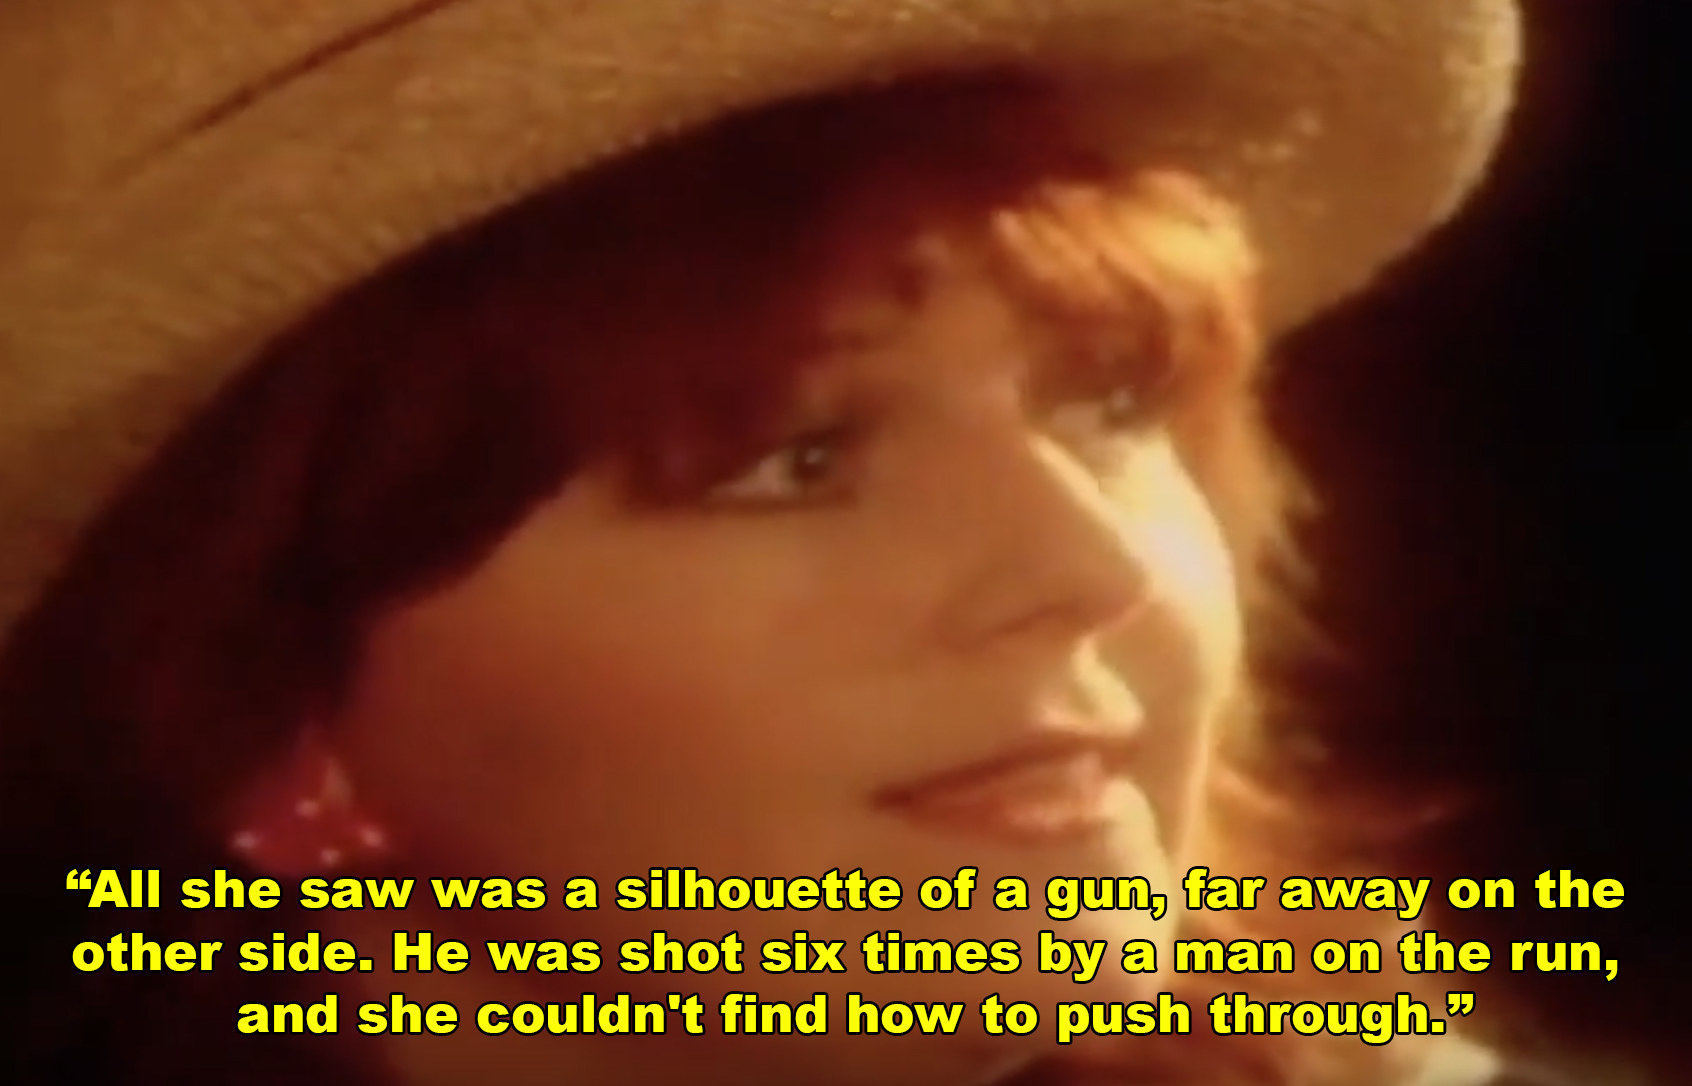 &quot;All she saw was the silhouette of a gun, far away on the other side. He was shot...&quot;